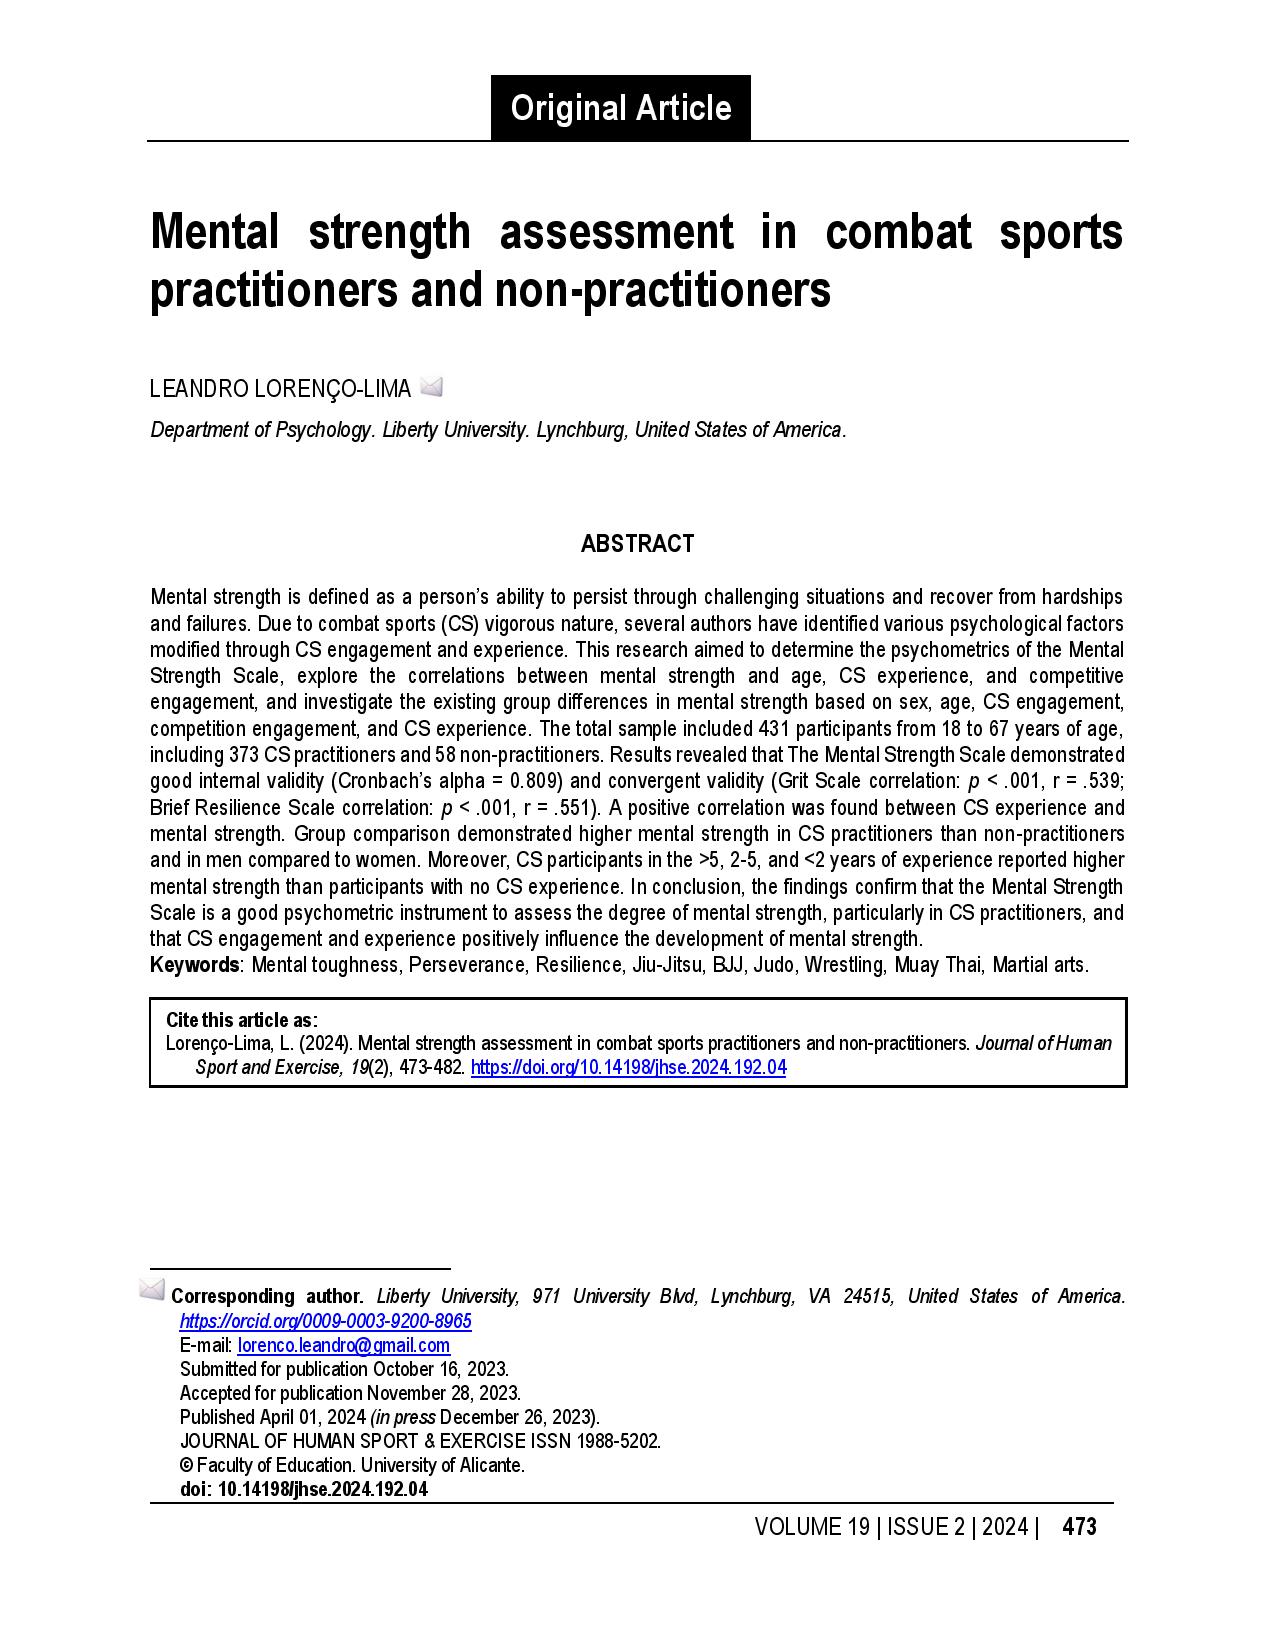 Mental strength assessment in combat sports practitioners and non-practitioners